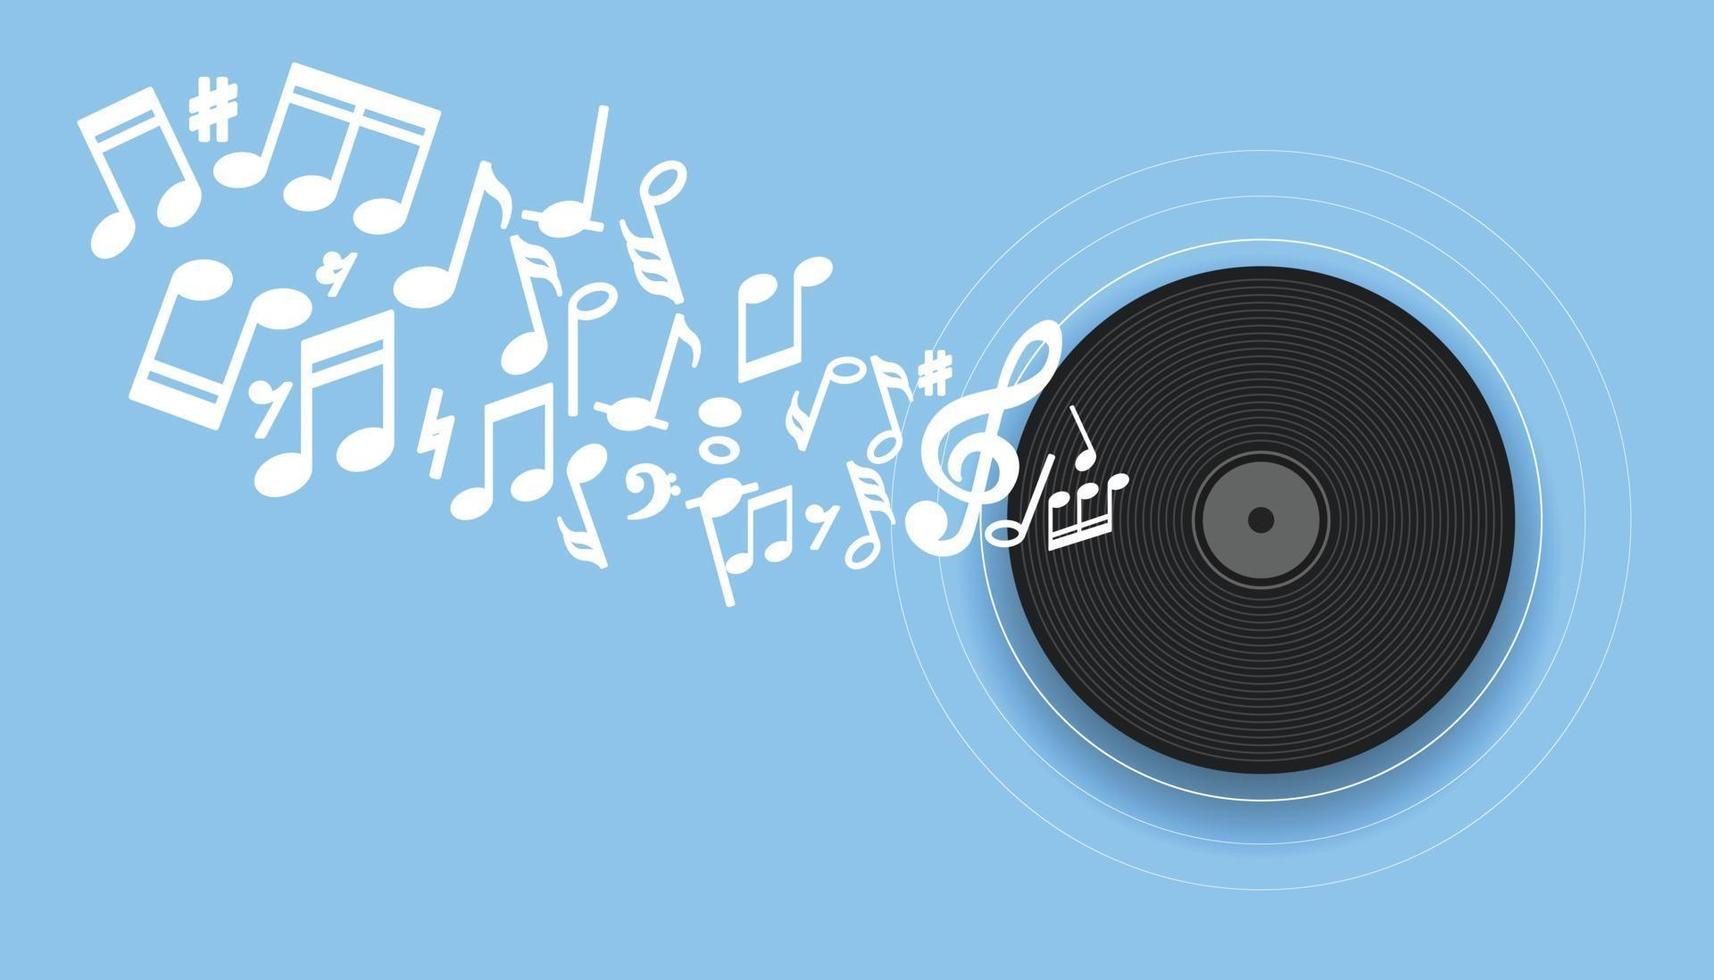 Musical Notes on the Gramophone vector